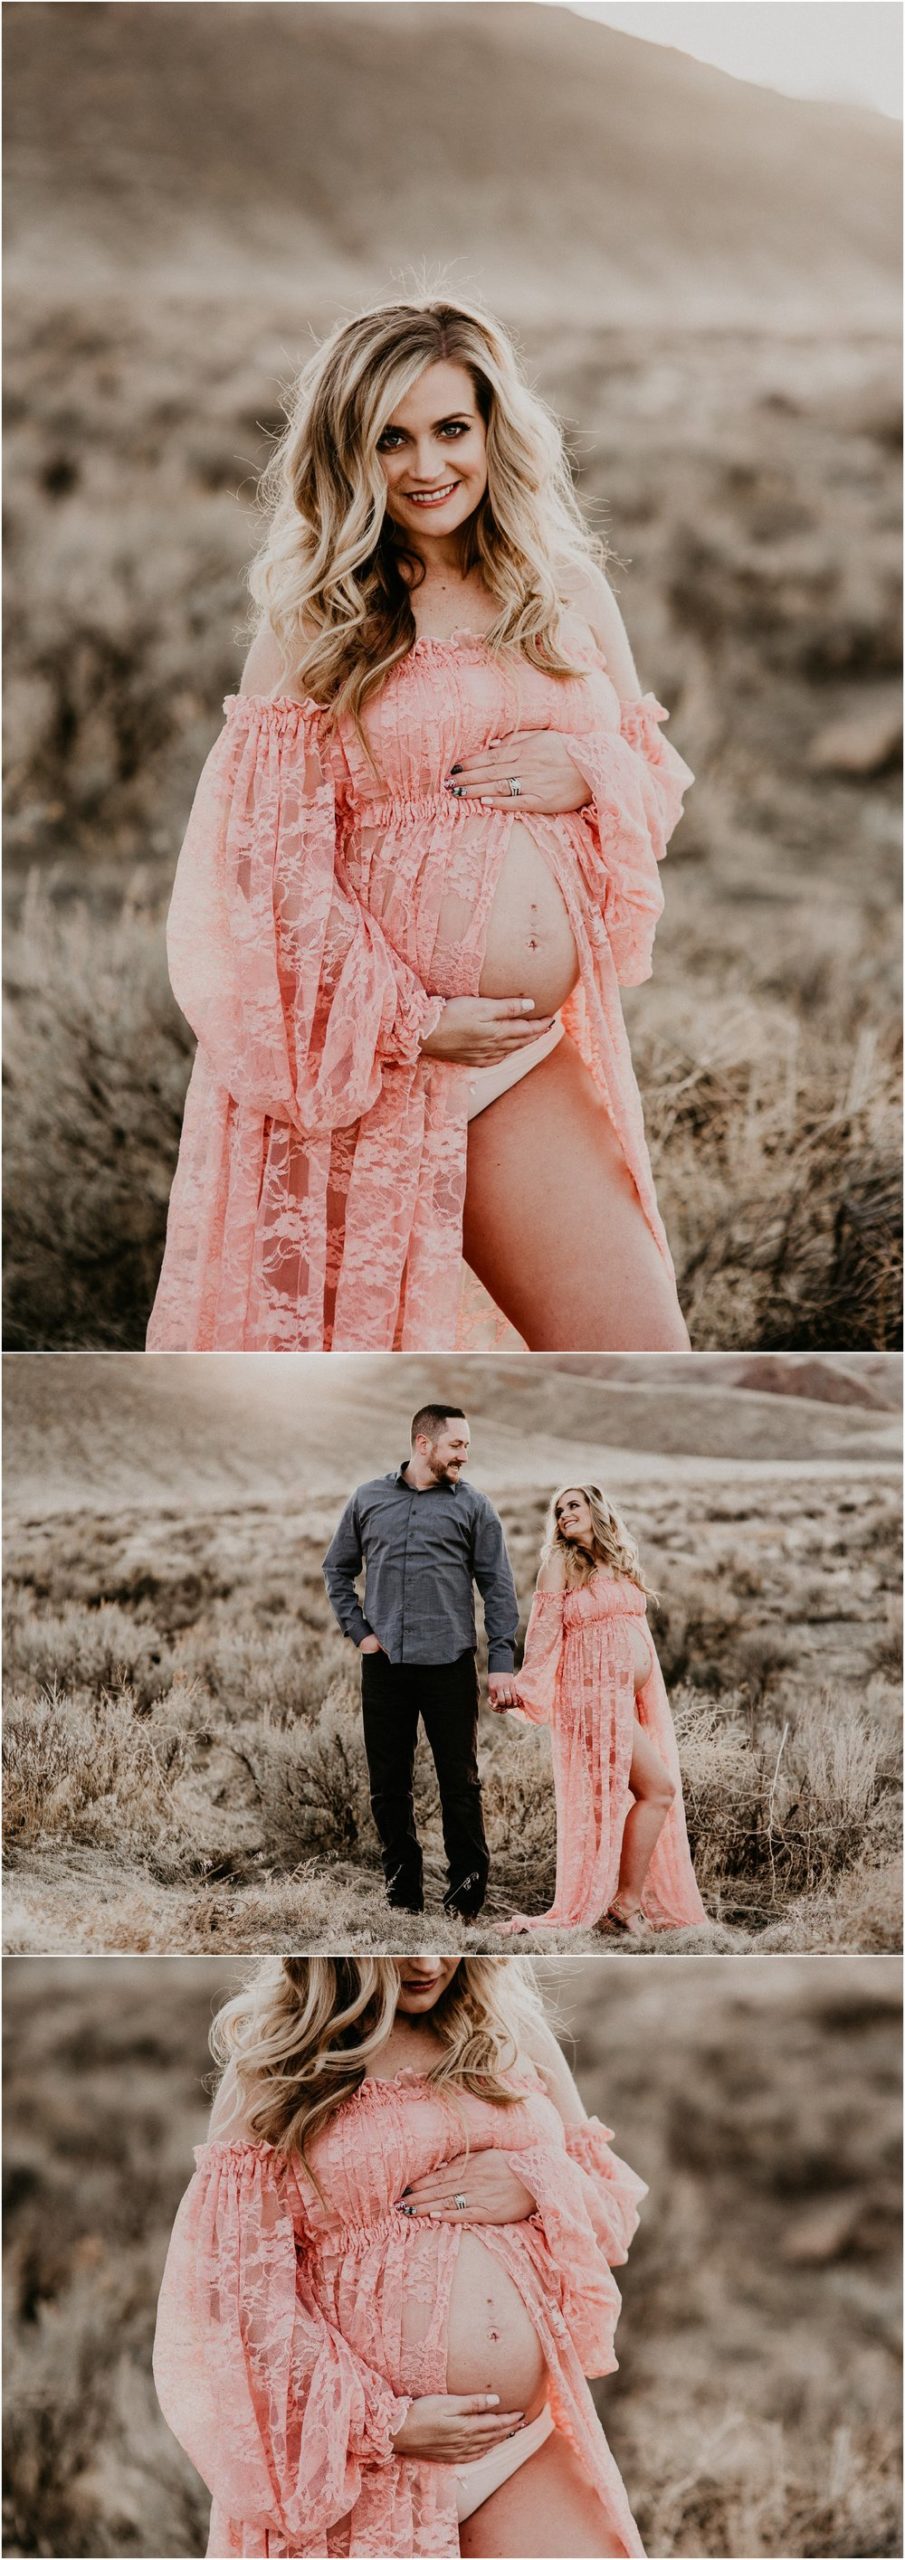 Boise Maternity Boudoir Photographer Makayla Madden Photography Lace Blush Maternity Dress Sew Trendy Accessories Idaho Motherhood Expecting Hair and Makeup Artist Behrens Artistry Baby Bump 